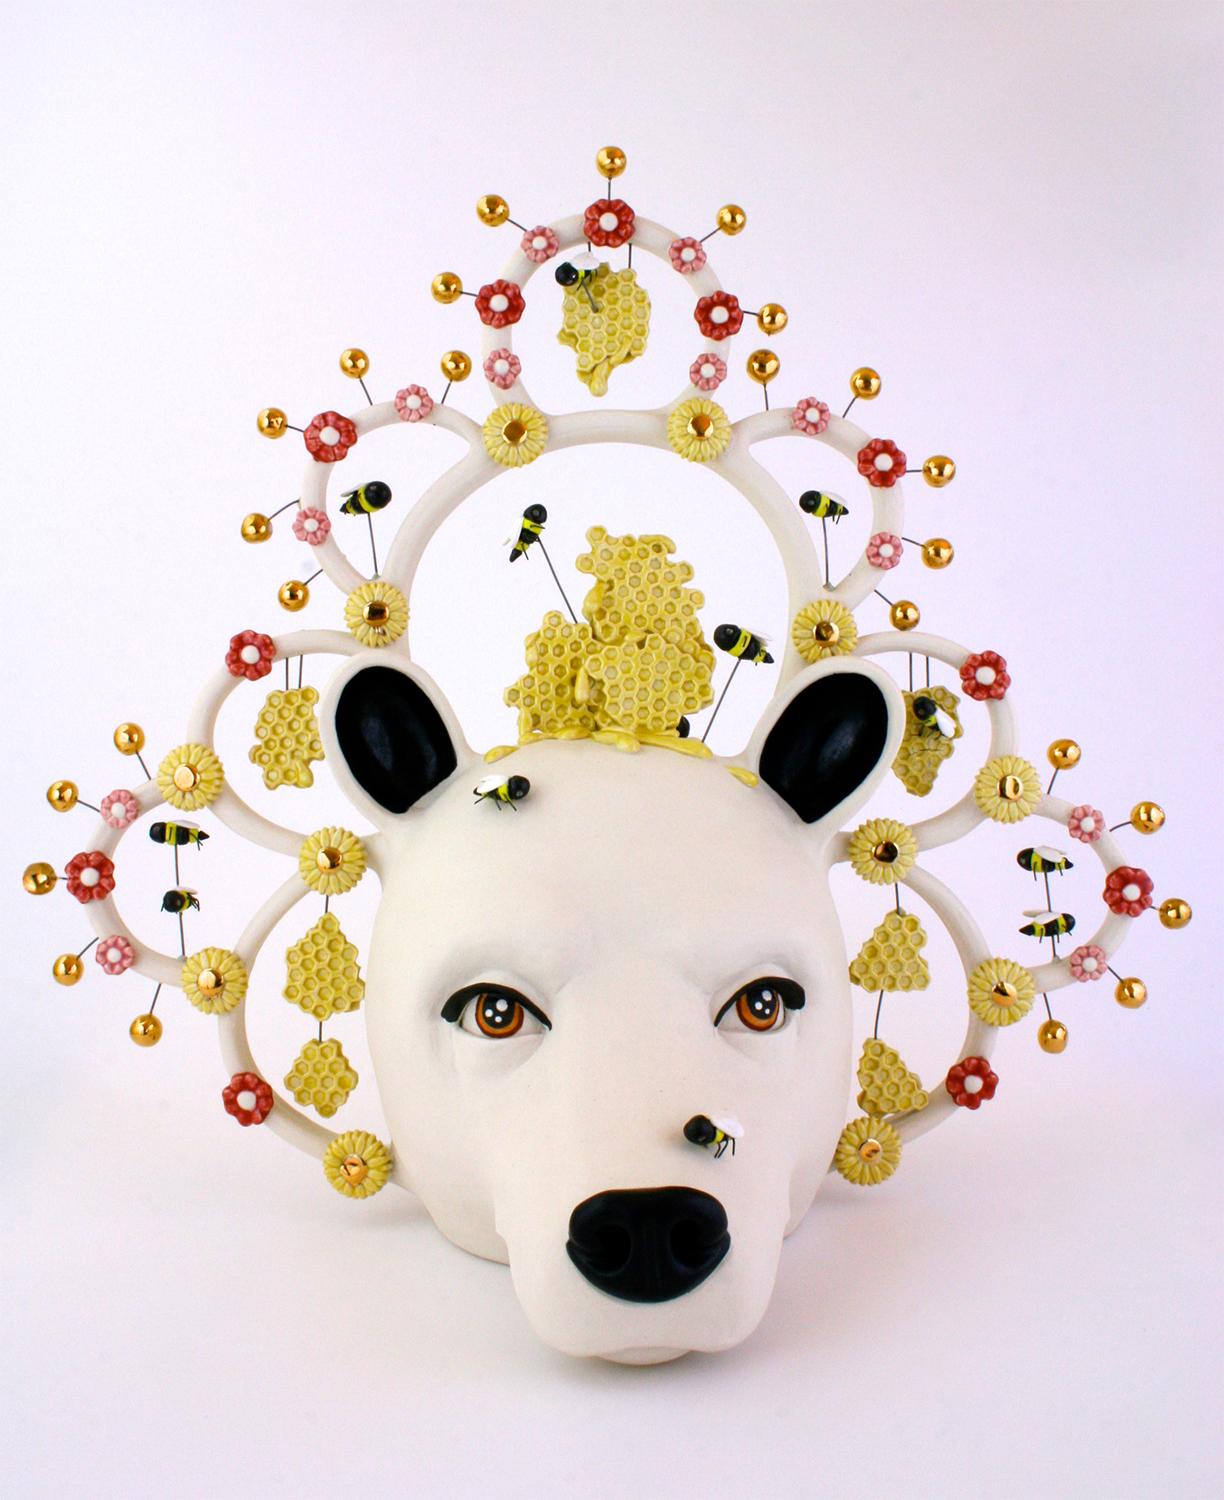 Taylor Robenalt Figurative Sculpture - BEES AND A BEAR - porcelain ceramic sculpture with bear, bees and flowers